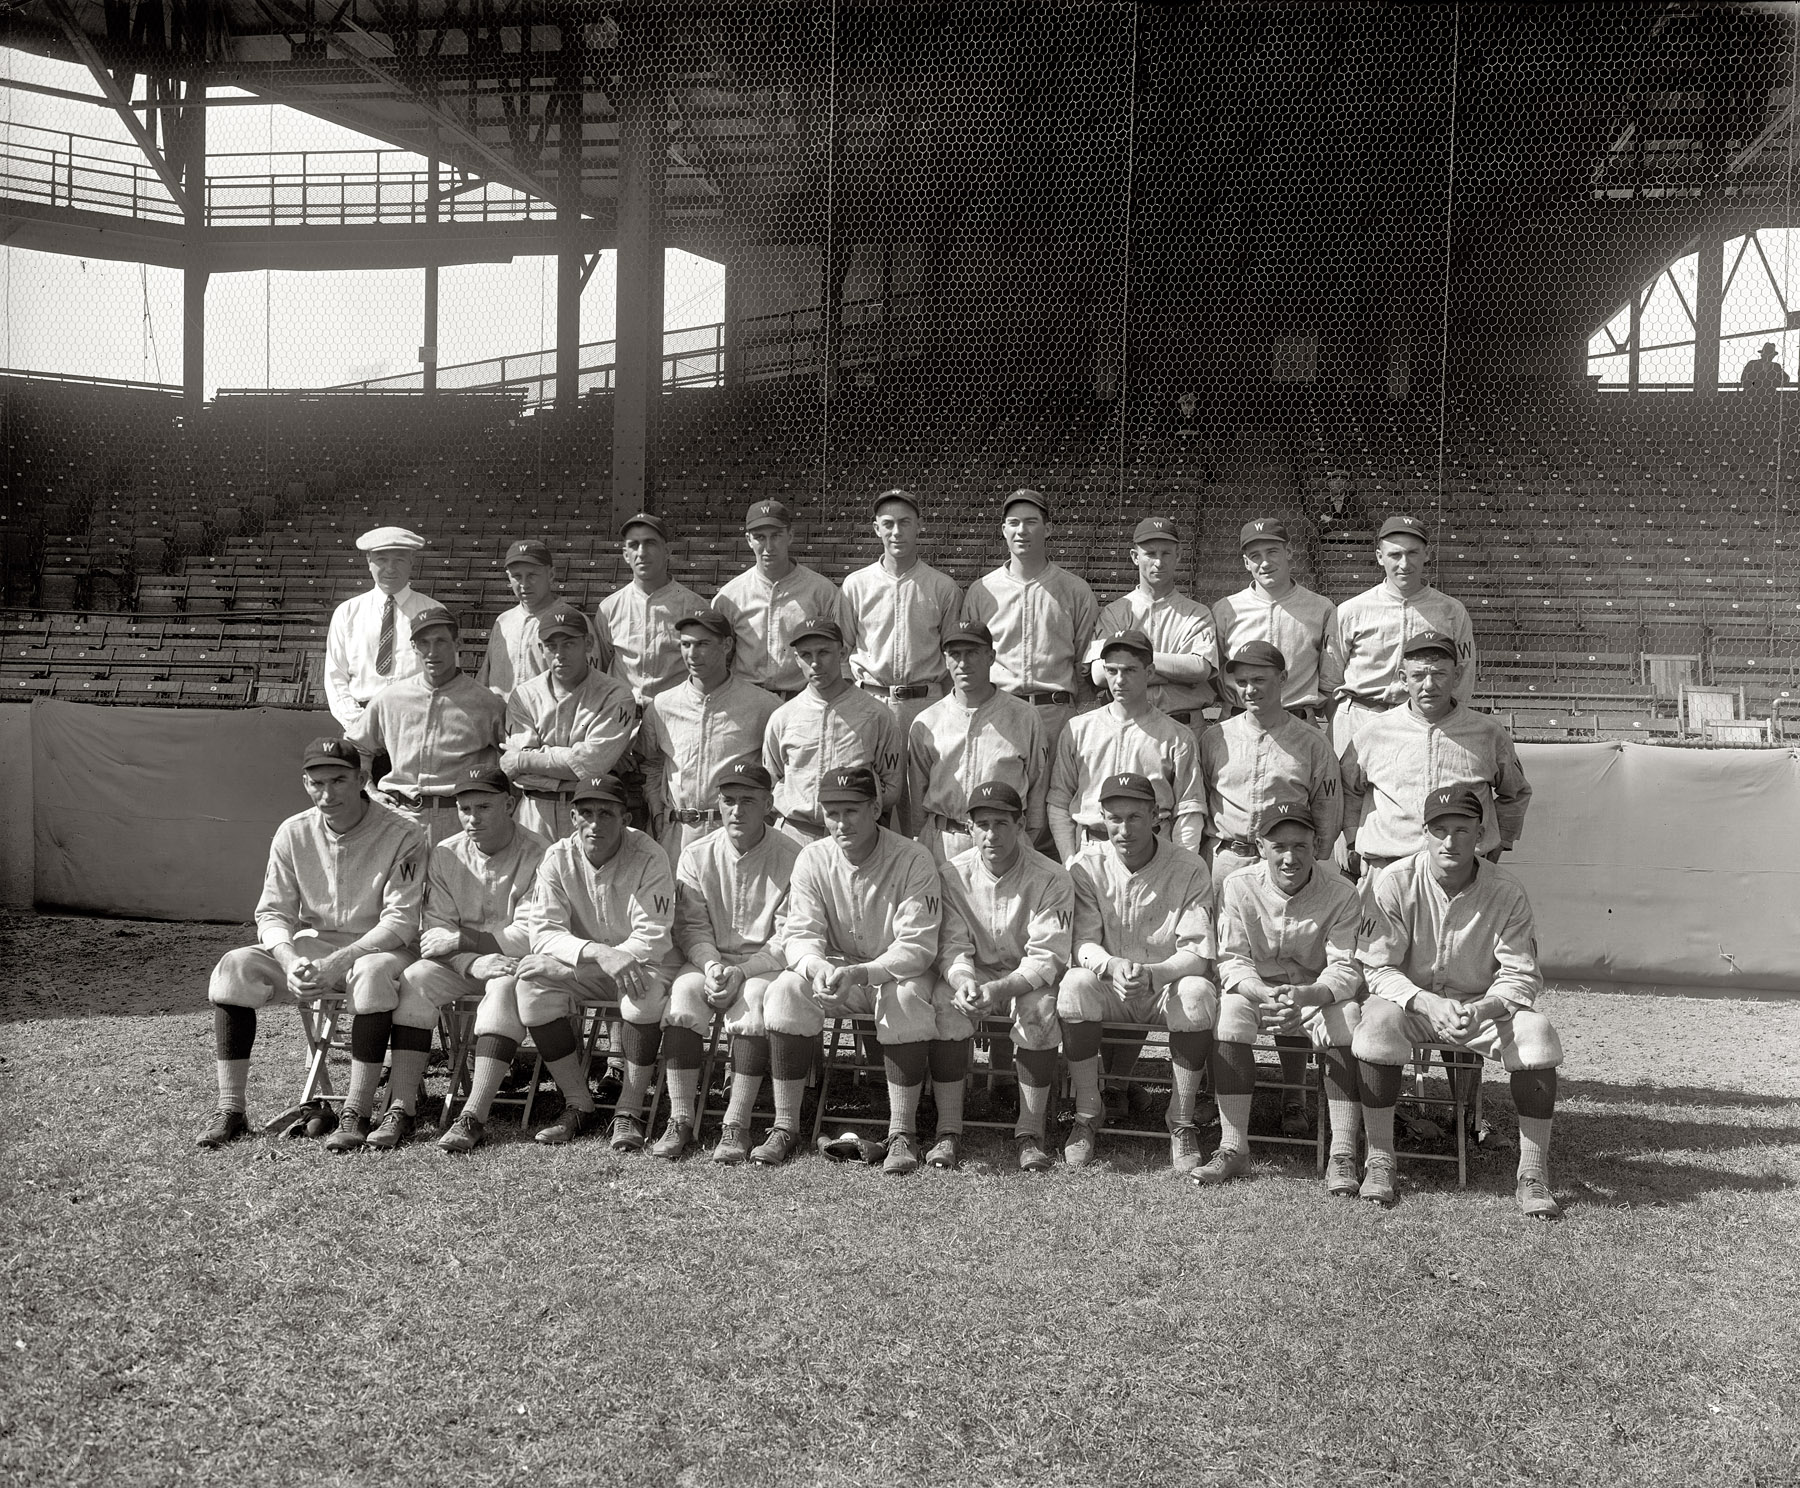 "Washington Baseball Club, Griffith Stadium, 1924." National Photo Company Collection glass negative, Library of Congress. View full size.